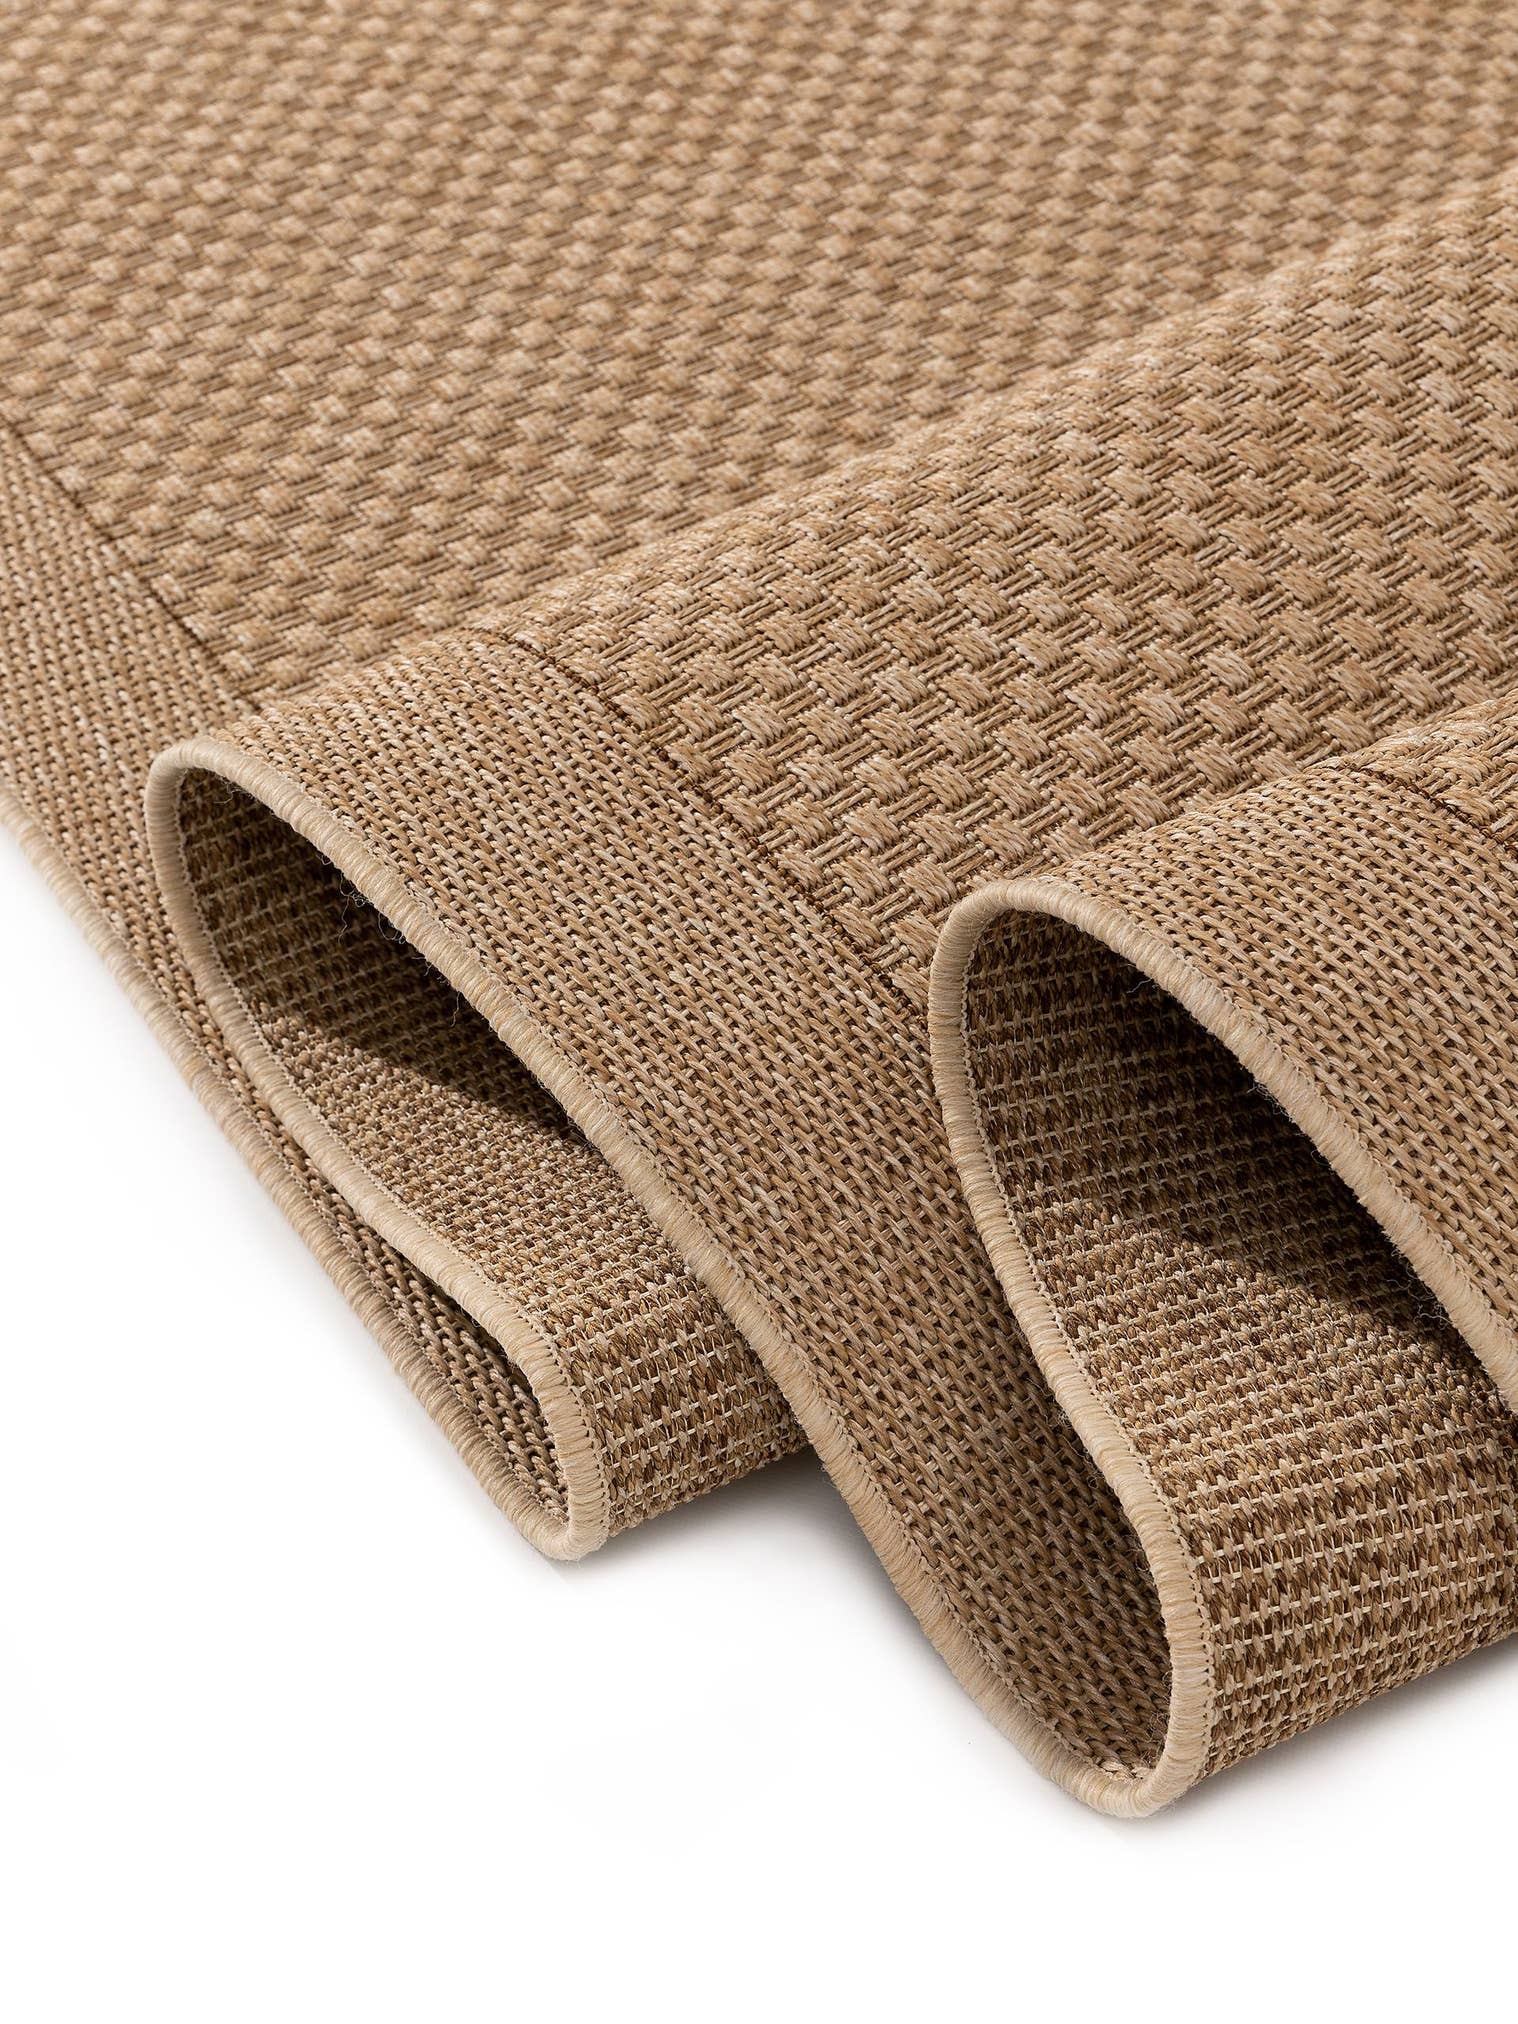 Rug made of 100% Polypropylene in Beige with a 6 - 10 mm high pile by benuta Nest